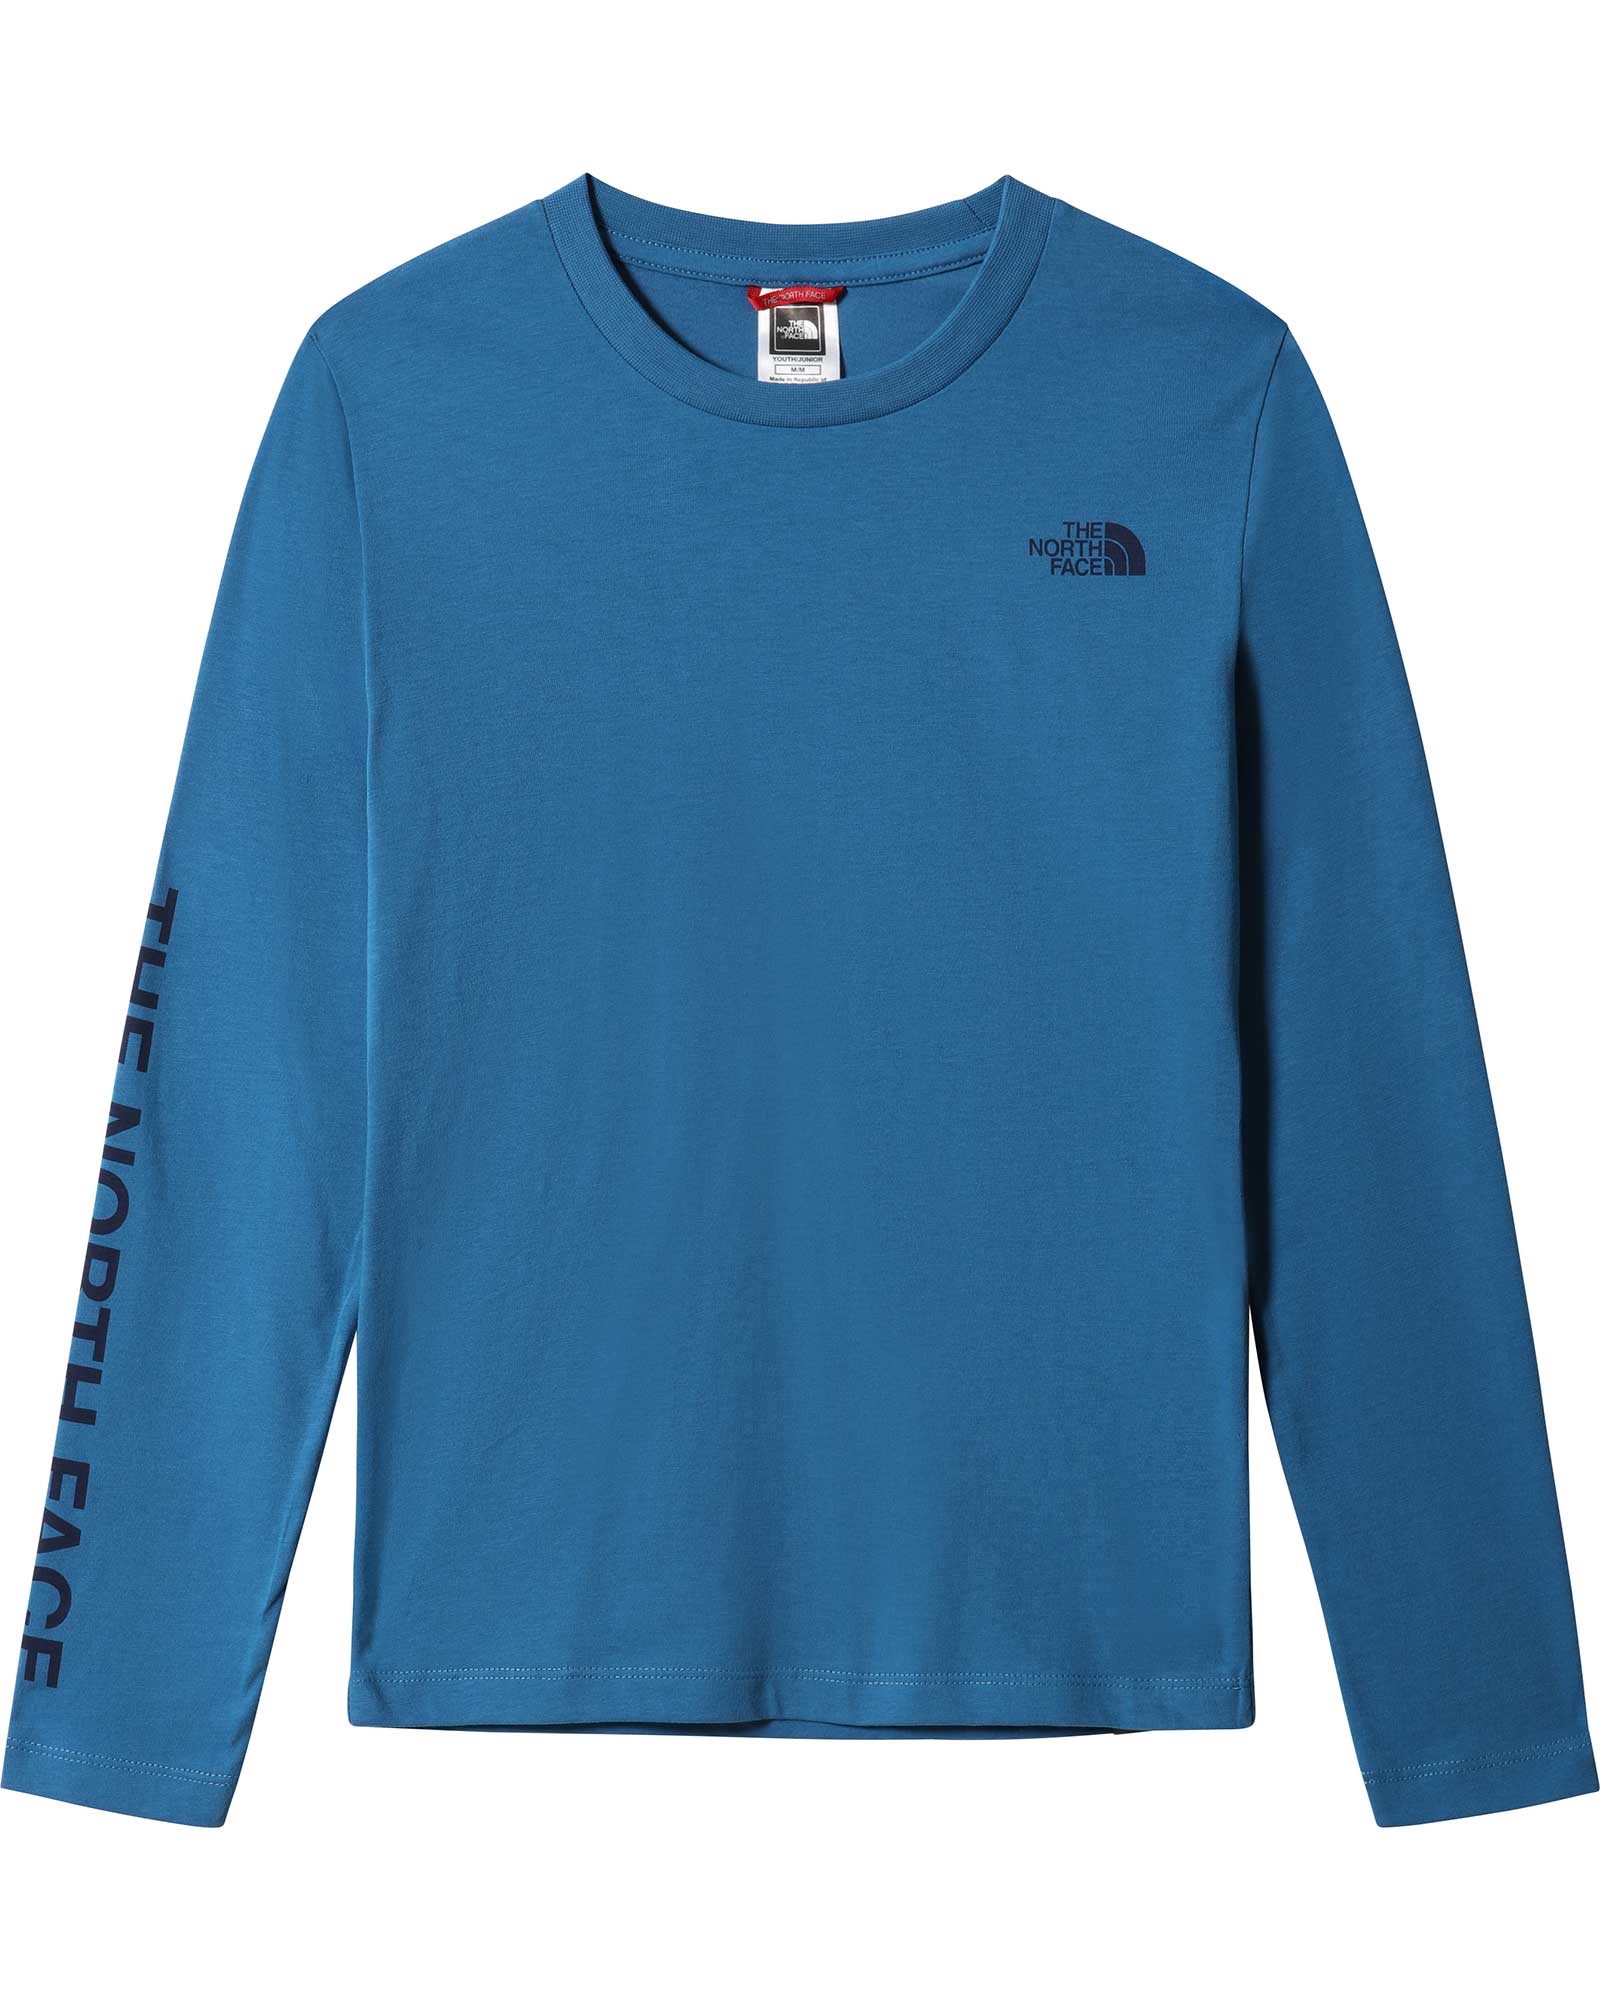 The North Face Youth Youth Long Sleeve Simple Dome Kids T-shirt